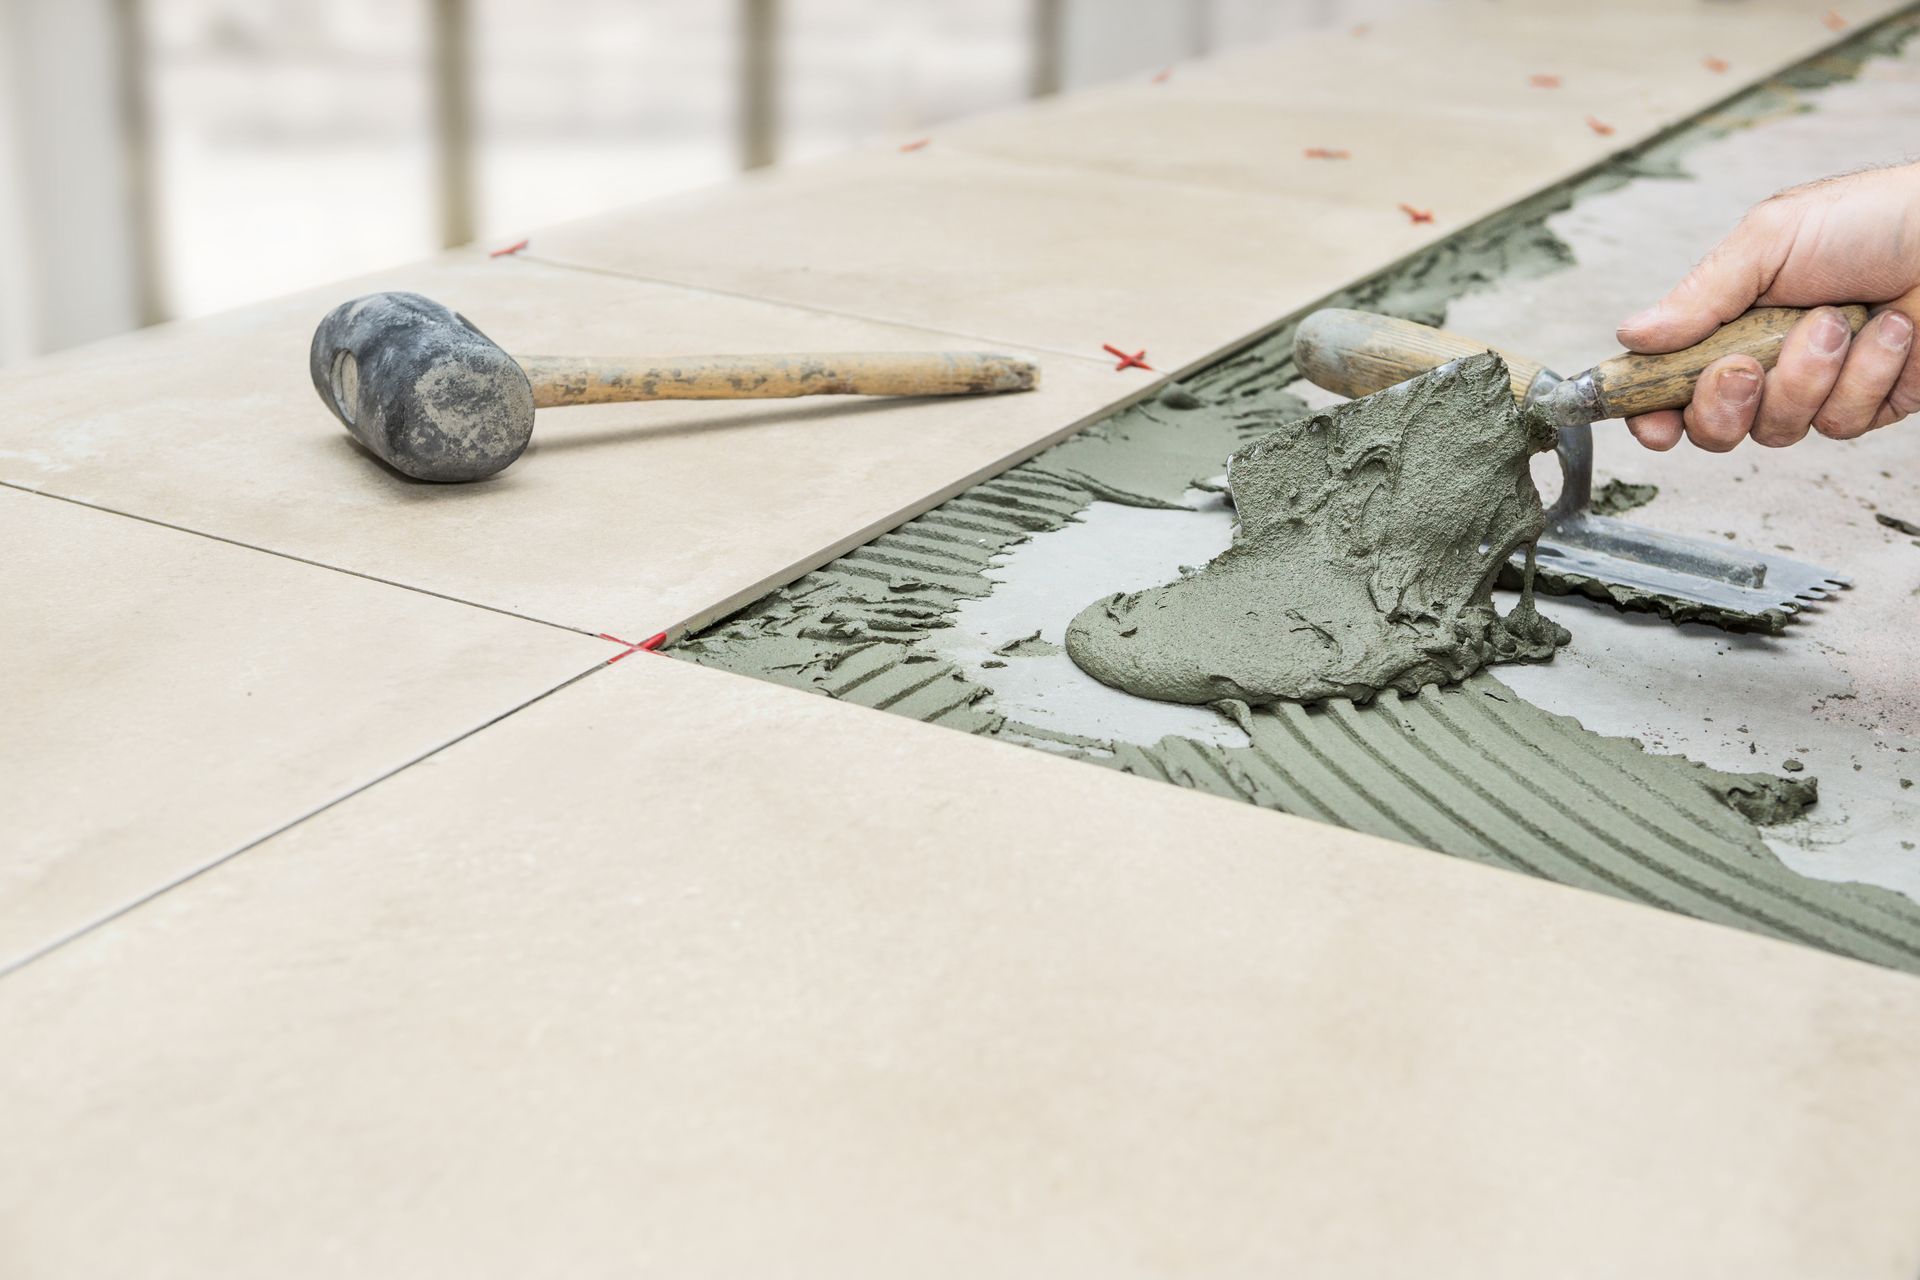 a person is applying concrete to a tile with a trowel